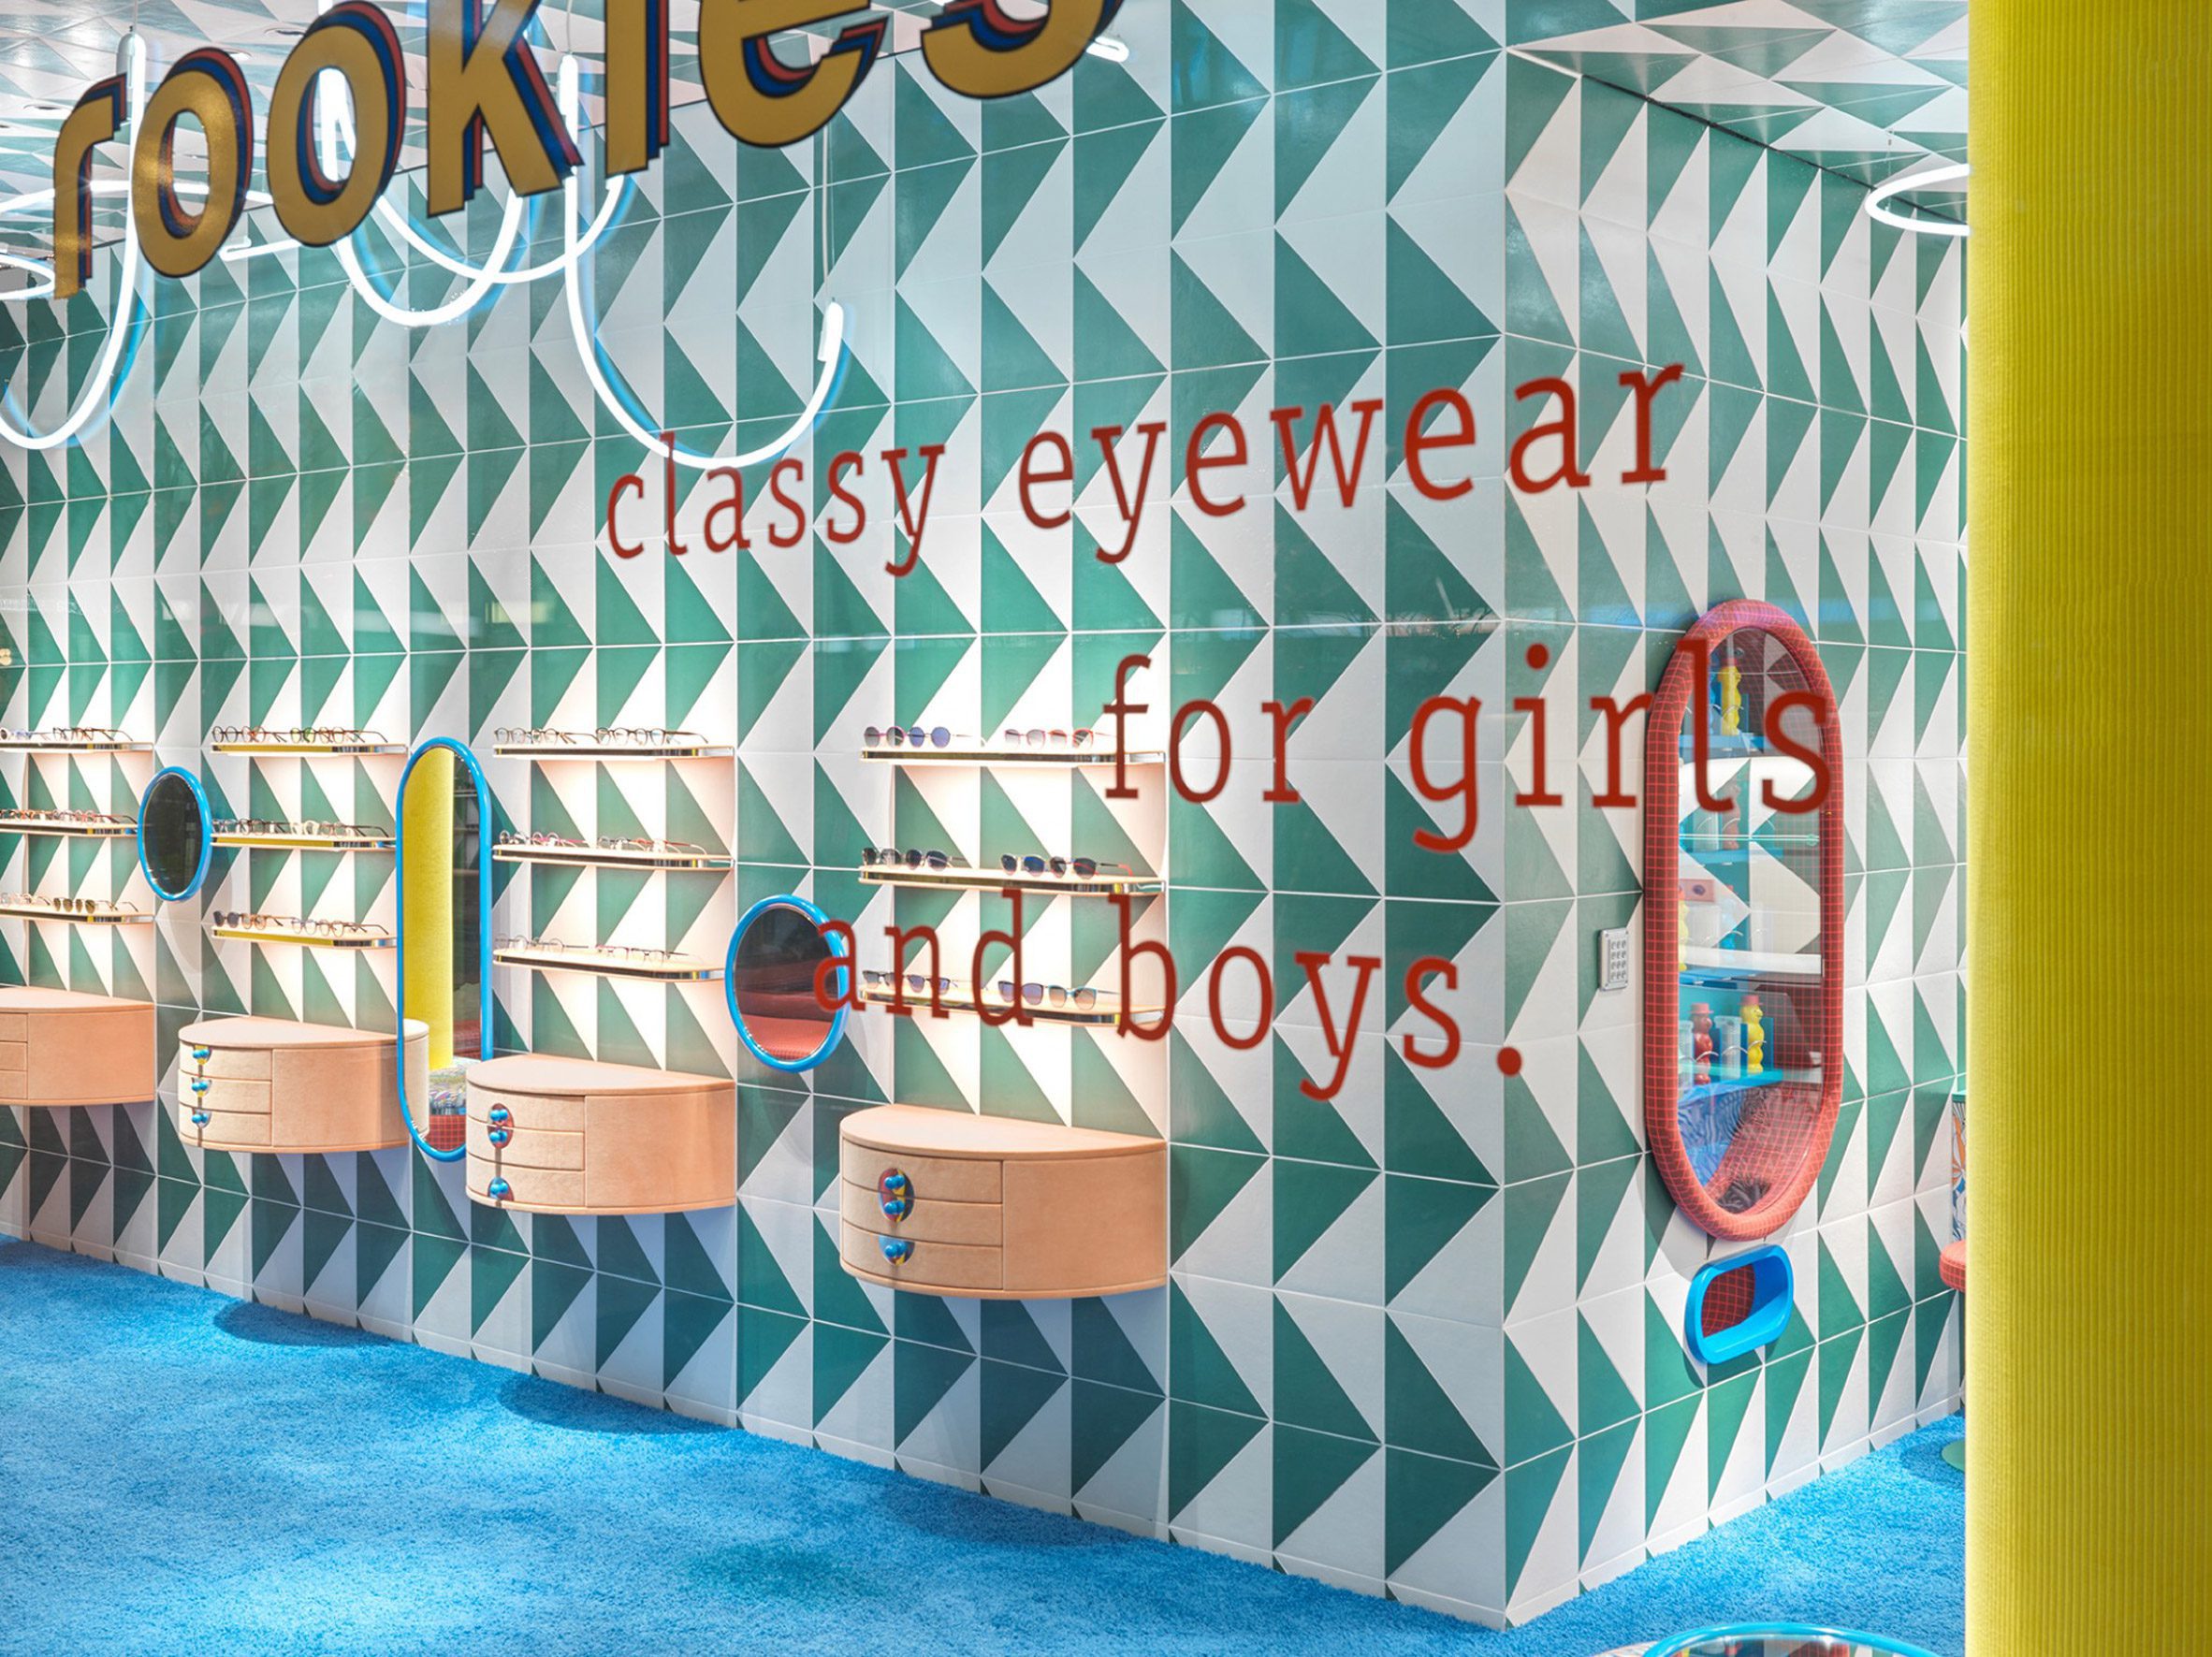 Brightly colored tiles and rugs cover the walls and floors of the Leidmann eyewear